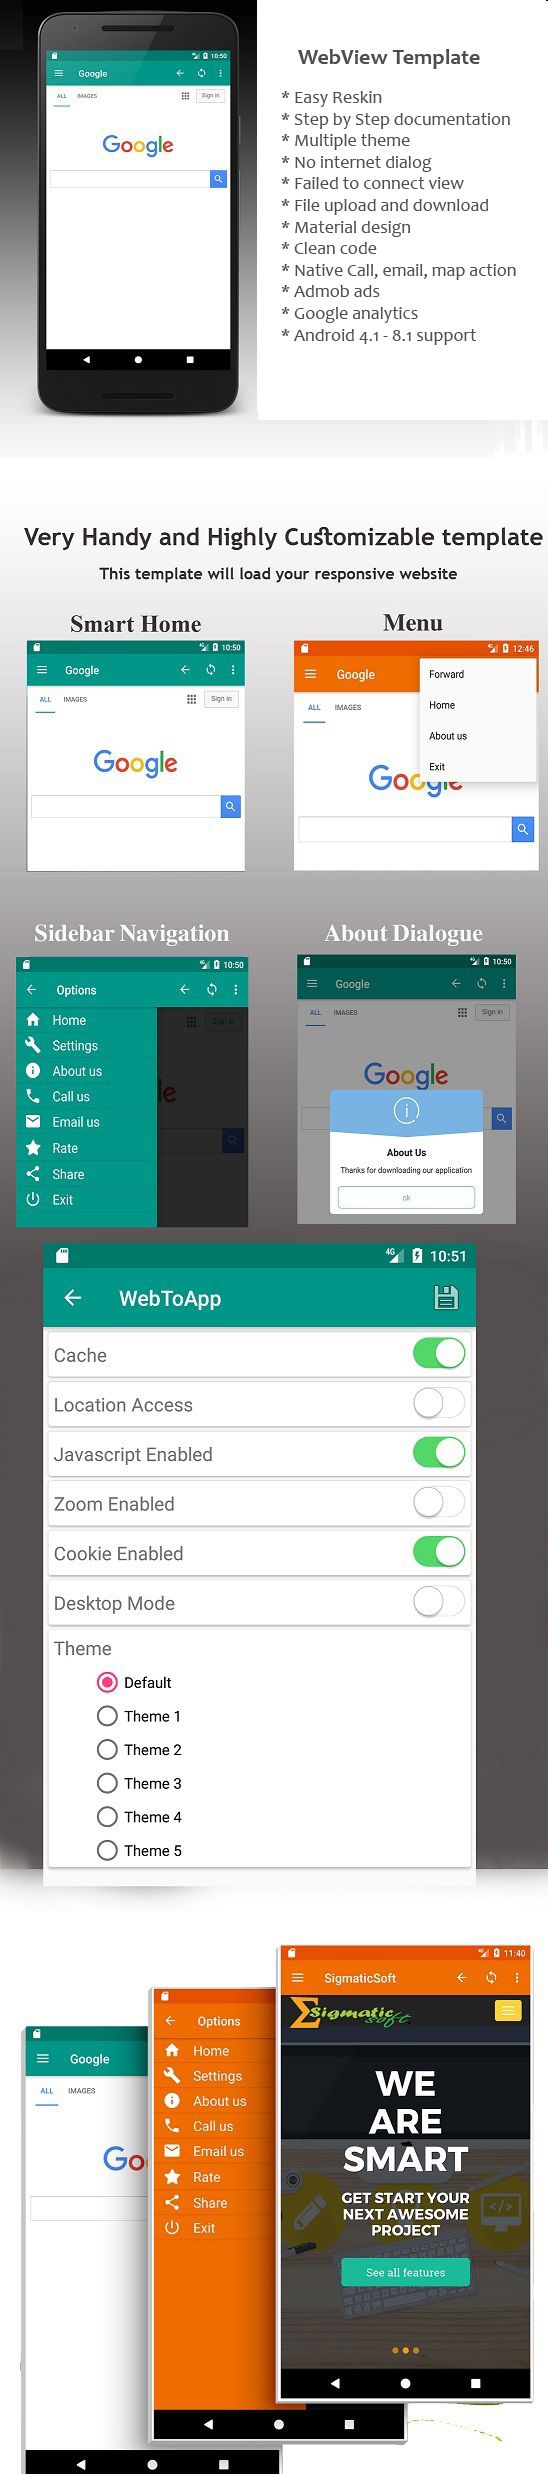 Easy Web - Android Native WebView | WebToApp Template with Admob and Push Notification - 3